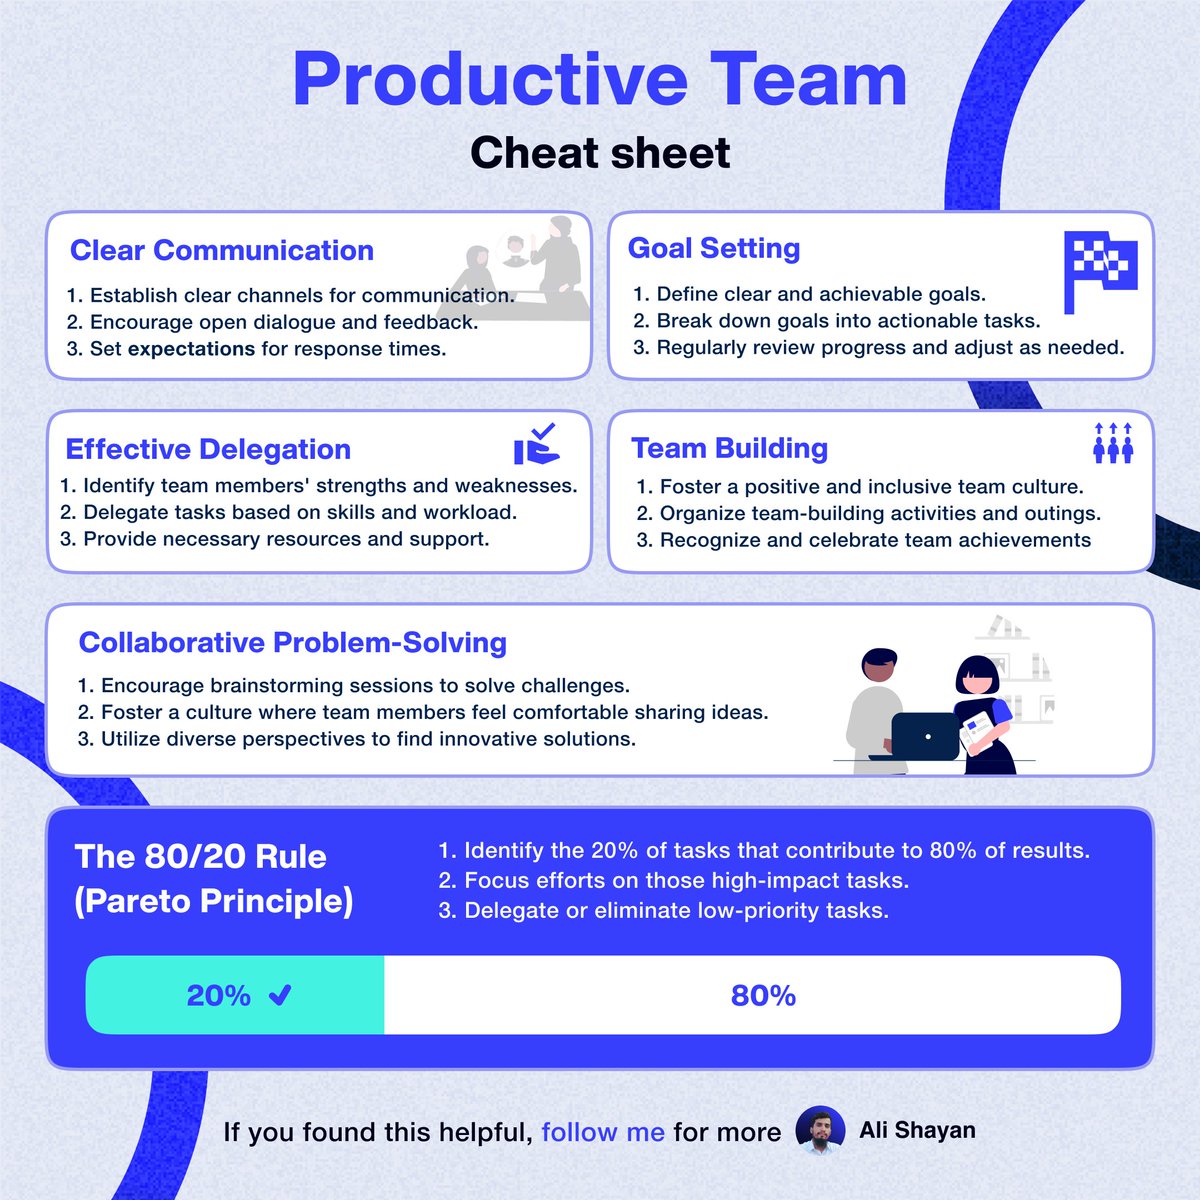 Cheatsheet for a Productive Team
~~~~~
✍️ What are your thoughts on The 80/20 Rule?
♻️ Reshare if these cheats were helpful!

#productivity #webdesign #agencyowner #founder #team